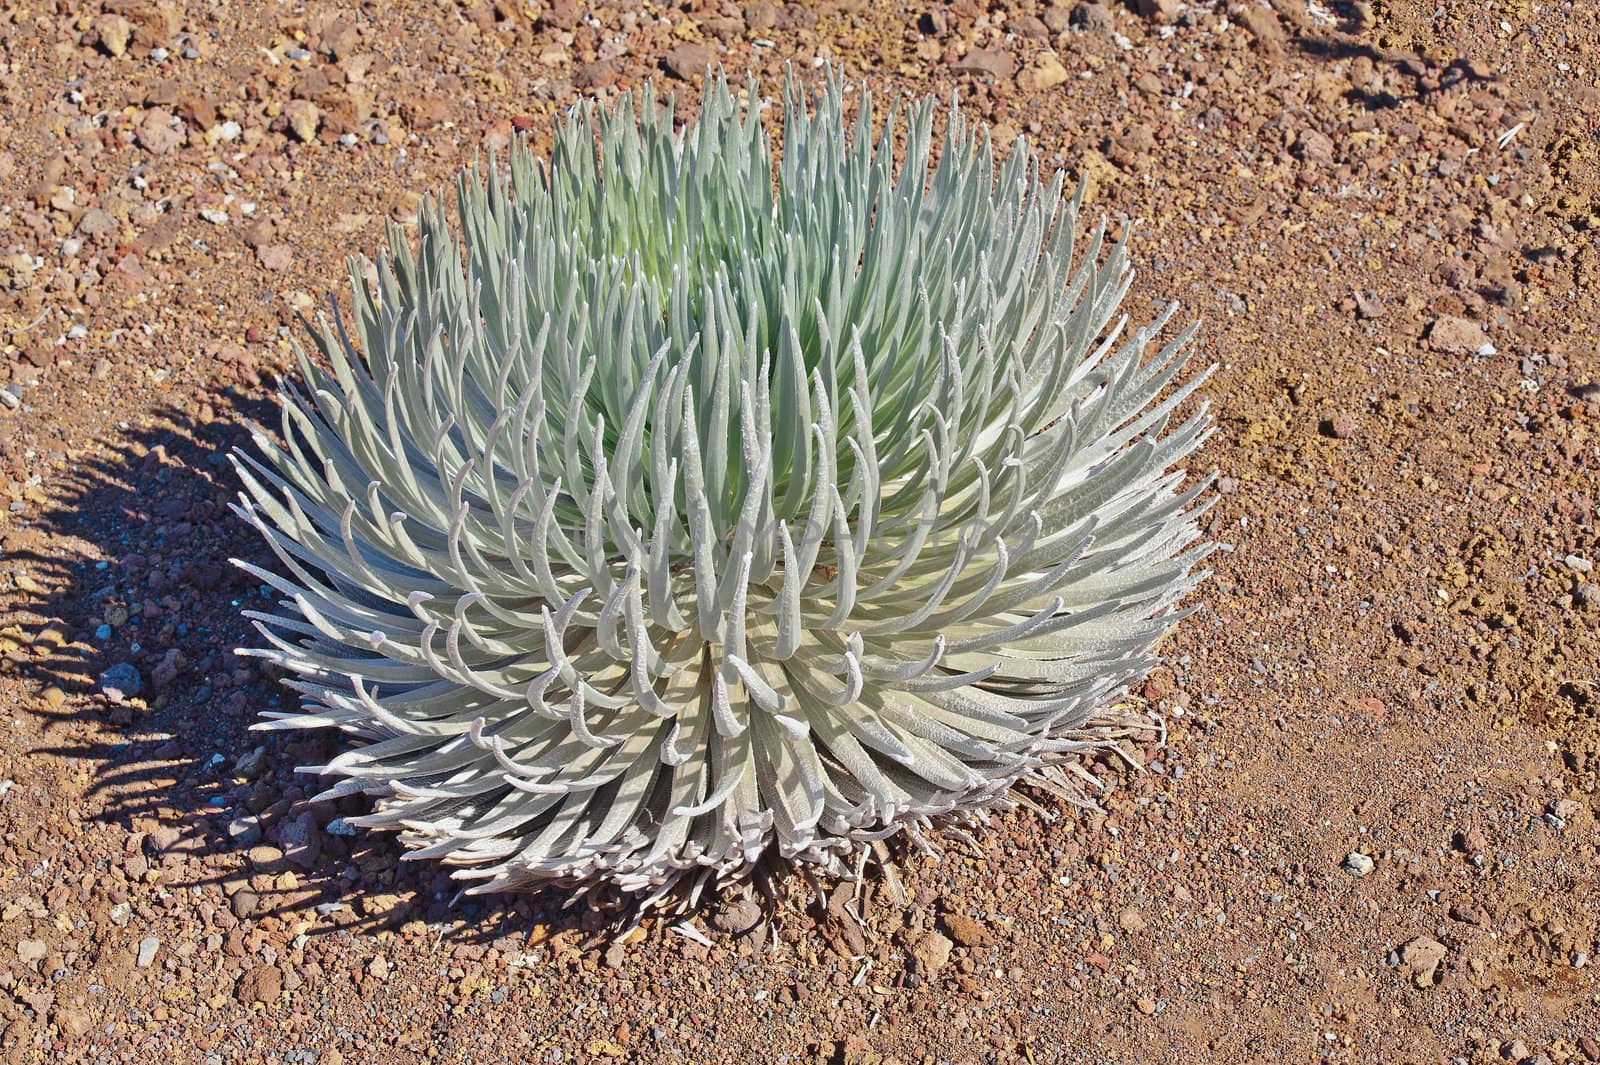 Haleakala Silversword is a rare plant that only grows in cold and dry high altitude on Haleakala Volcano, Maui Island, Hawaii, USA. This plant is only found on the island of Maui in Haleakalā National Park at an elevation of 2,100 to 3,000 m on the Haleakalā summit depression, the rim summits, and surrounding slopes of the dormant Haleakalā Volcano.
